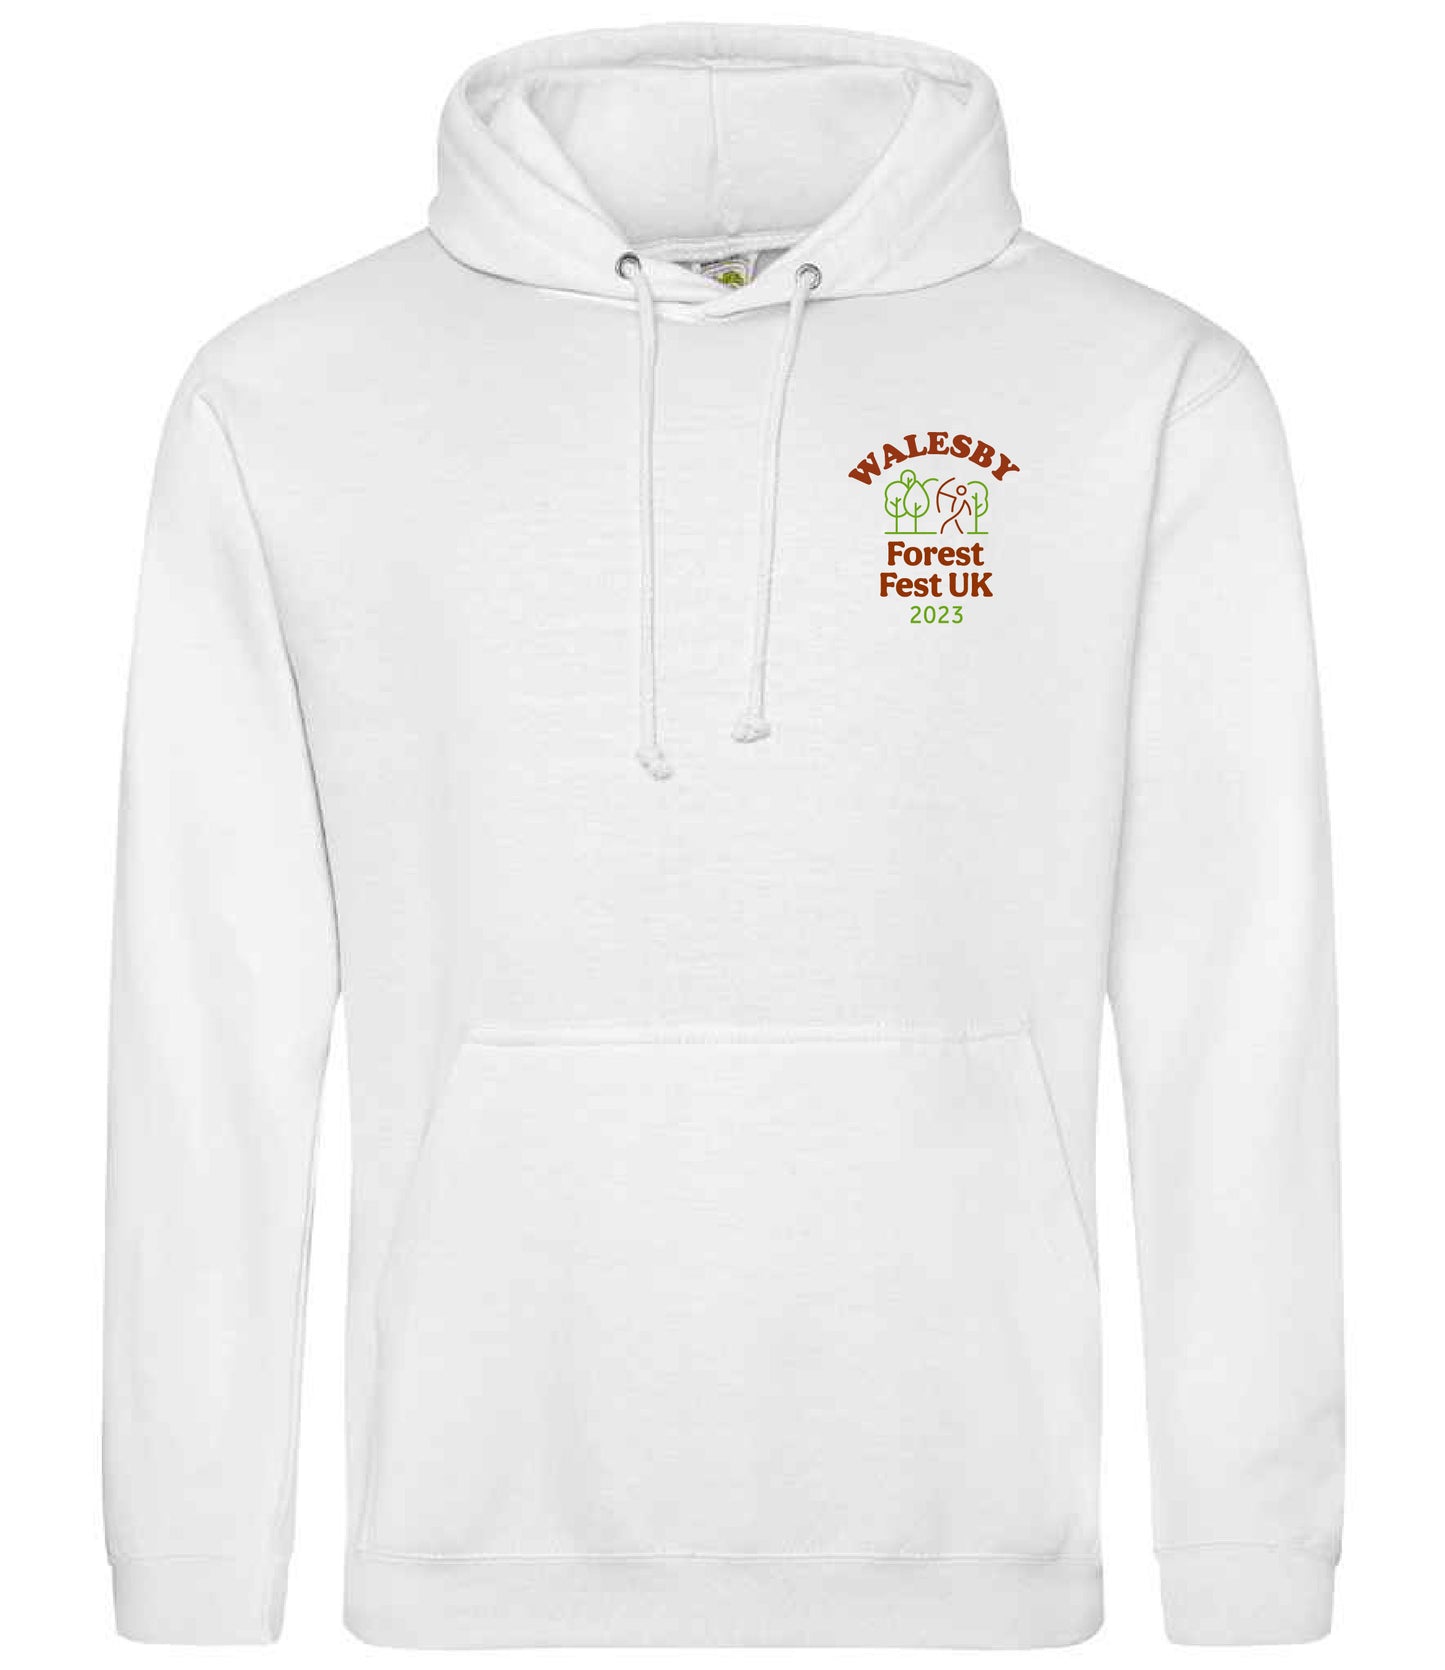 Adult Pullover Hoody